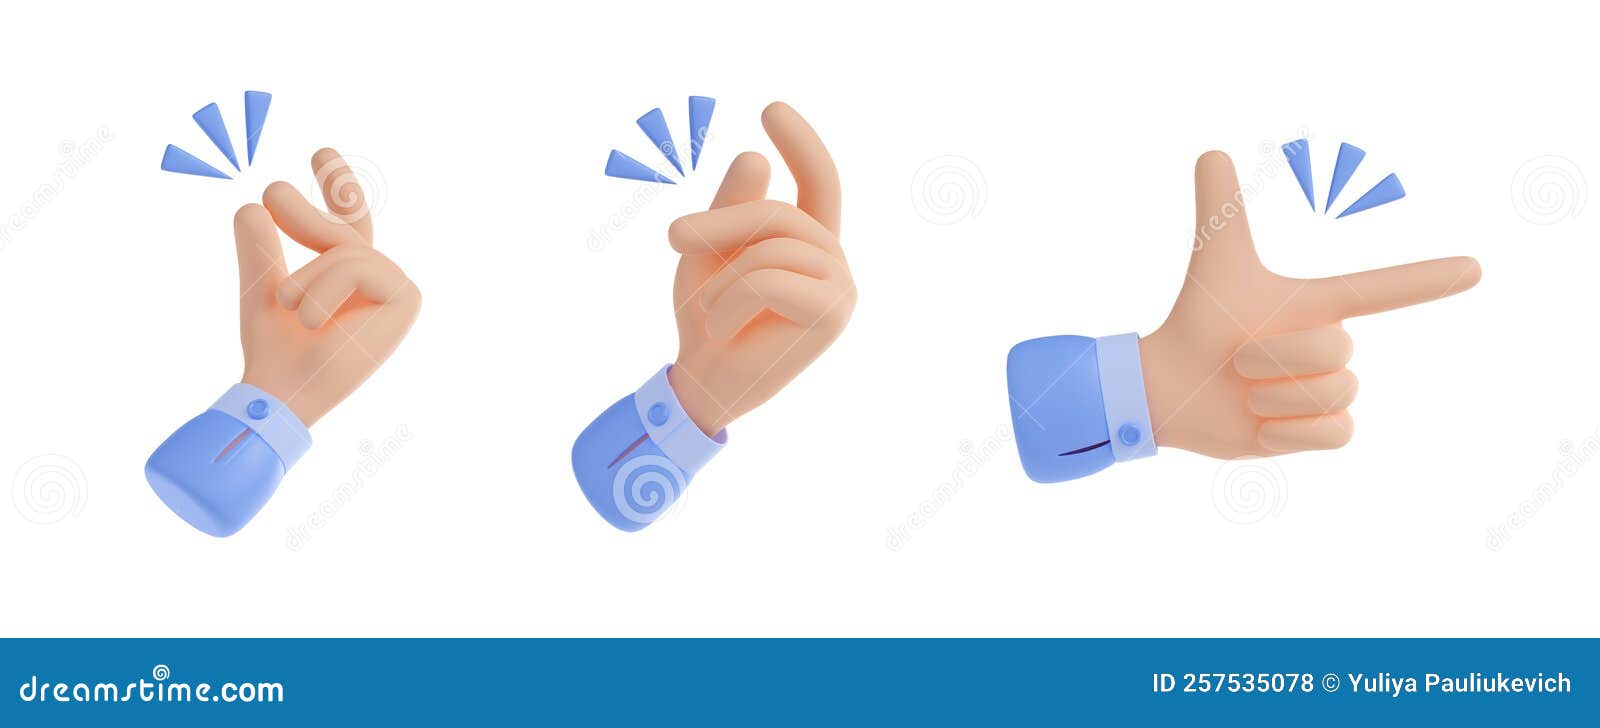 https://thumbs.dreamstime.com/z/fingers-snap-d-icon-hand-gesture-flick-man-easy-concept-idea-magic-pop-sound-set-poses-flicking-isolated-white-background-257535078.jpg